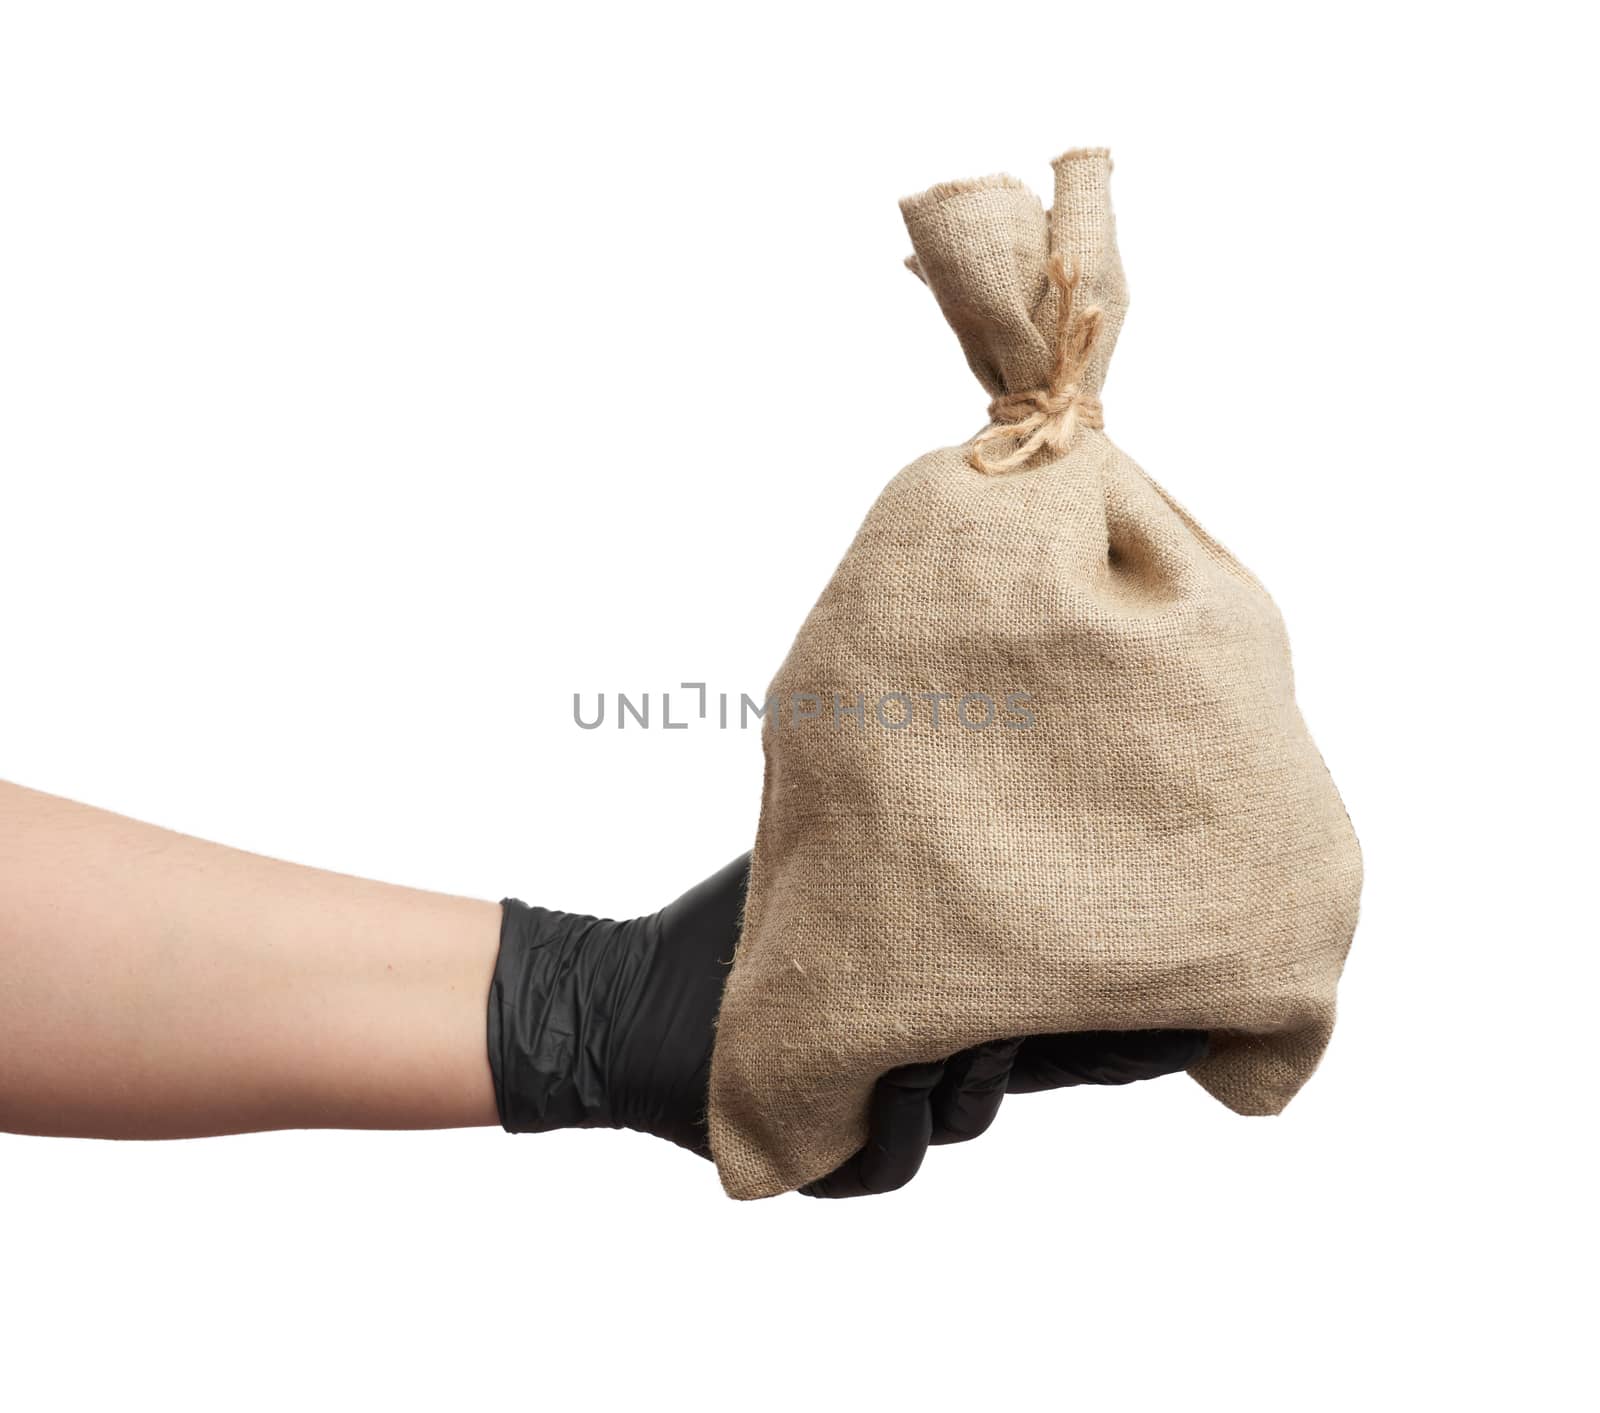 male hand in black latex glove holds a full canvas bag on a whit by ndanko